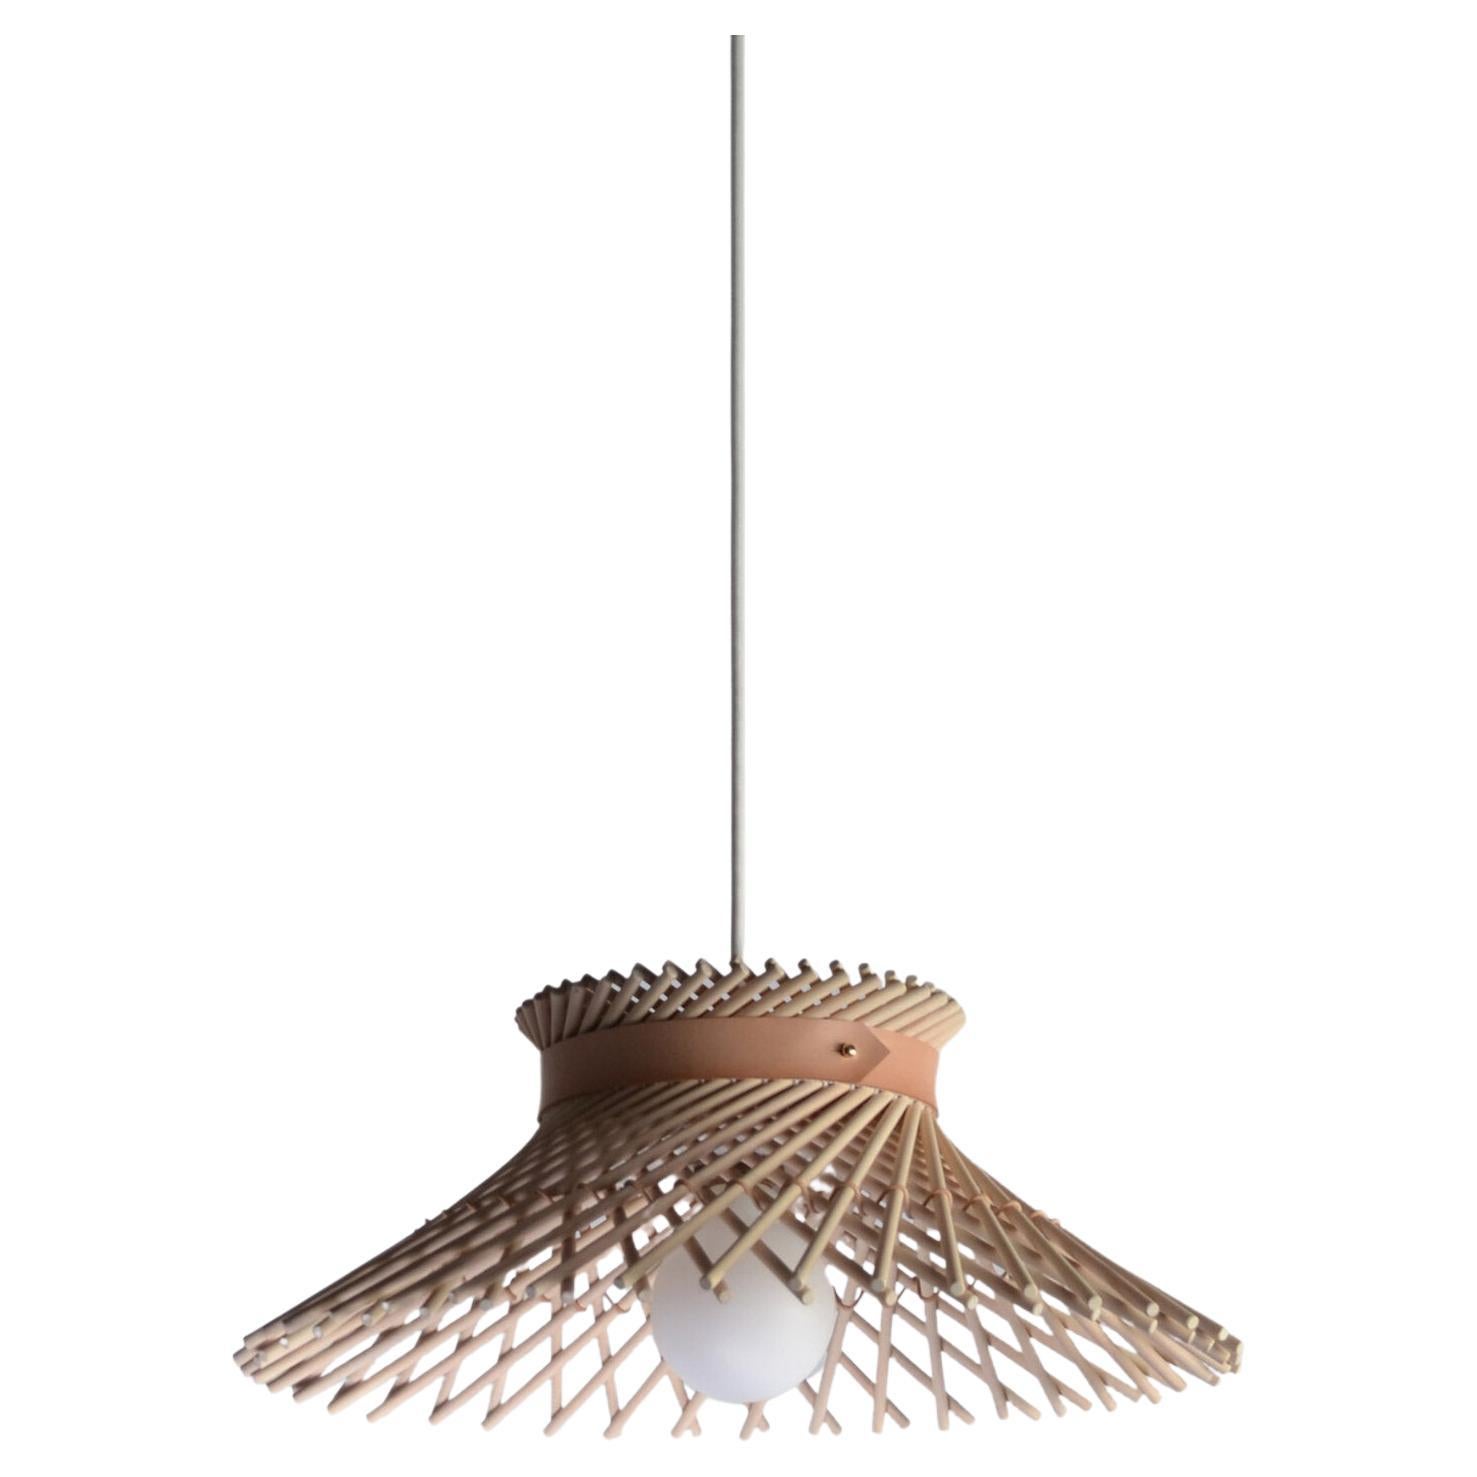 Mooda Ceiling Pendant Light 6 / Bleached Maple Wood, Mugla White Marble by INDO- For Sale